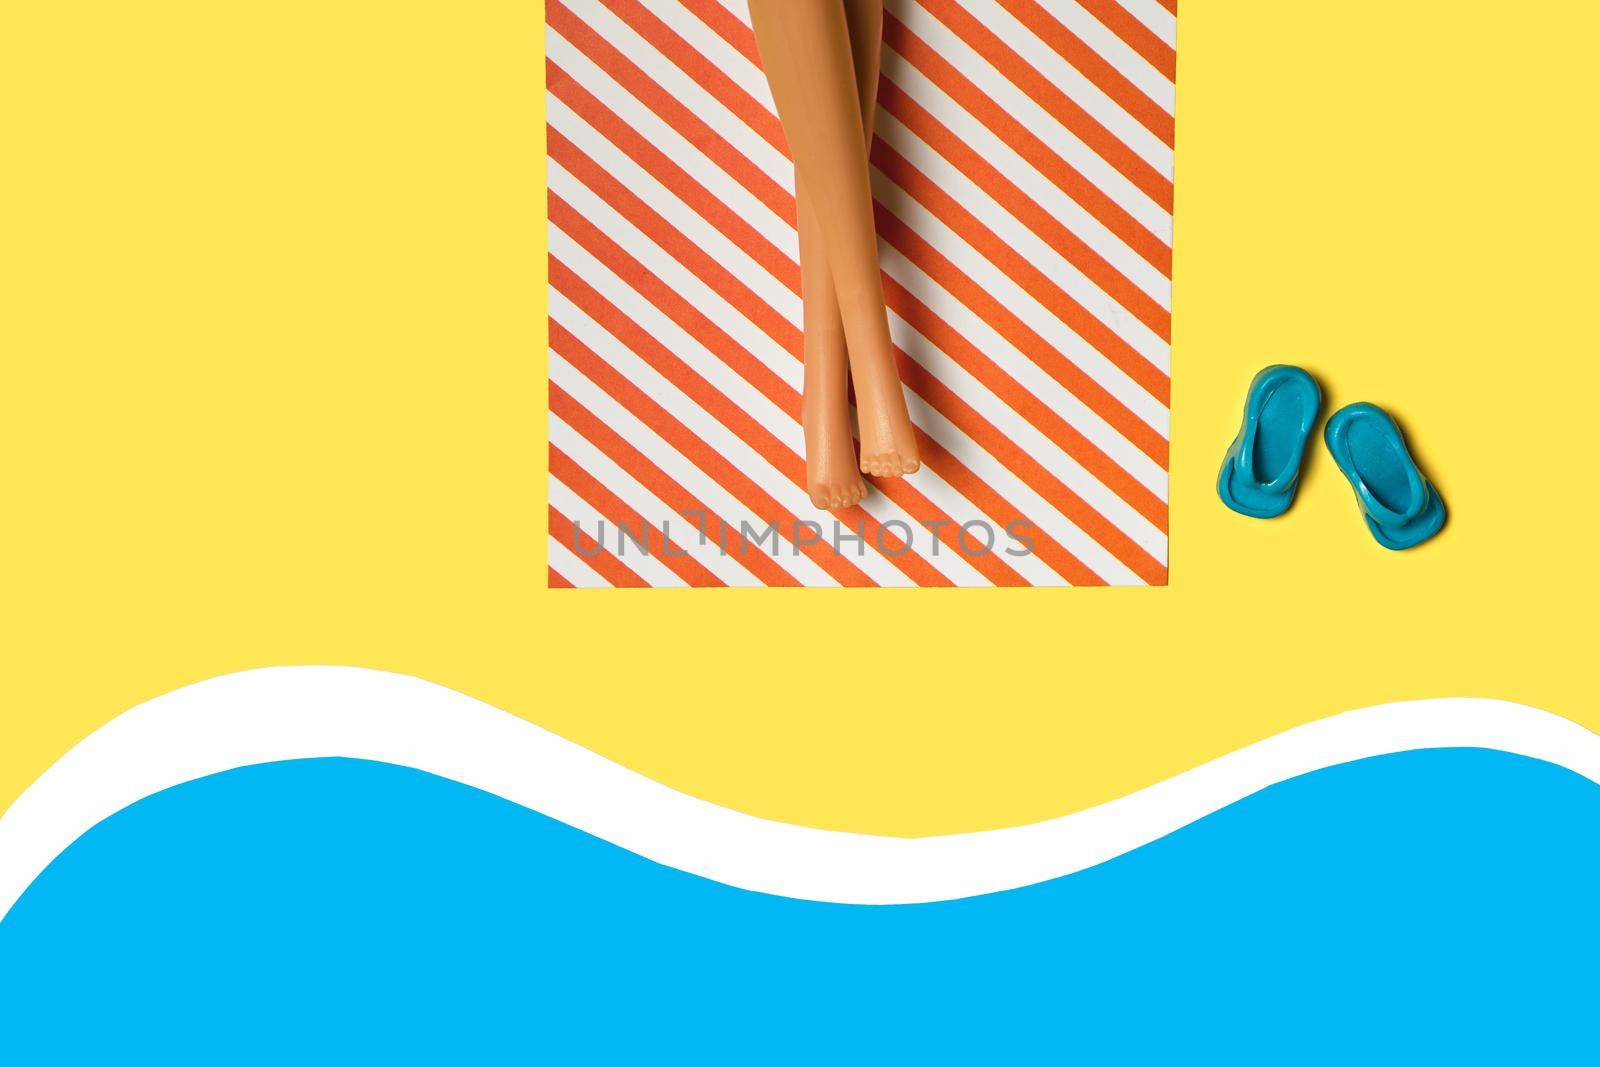 Creative minimal beach concept. Summer vacation layout with doll legs on beach towels, flat pool, beach, yellow background. Flat lay.